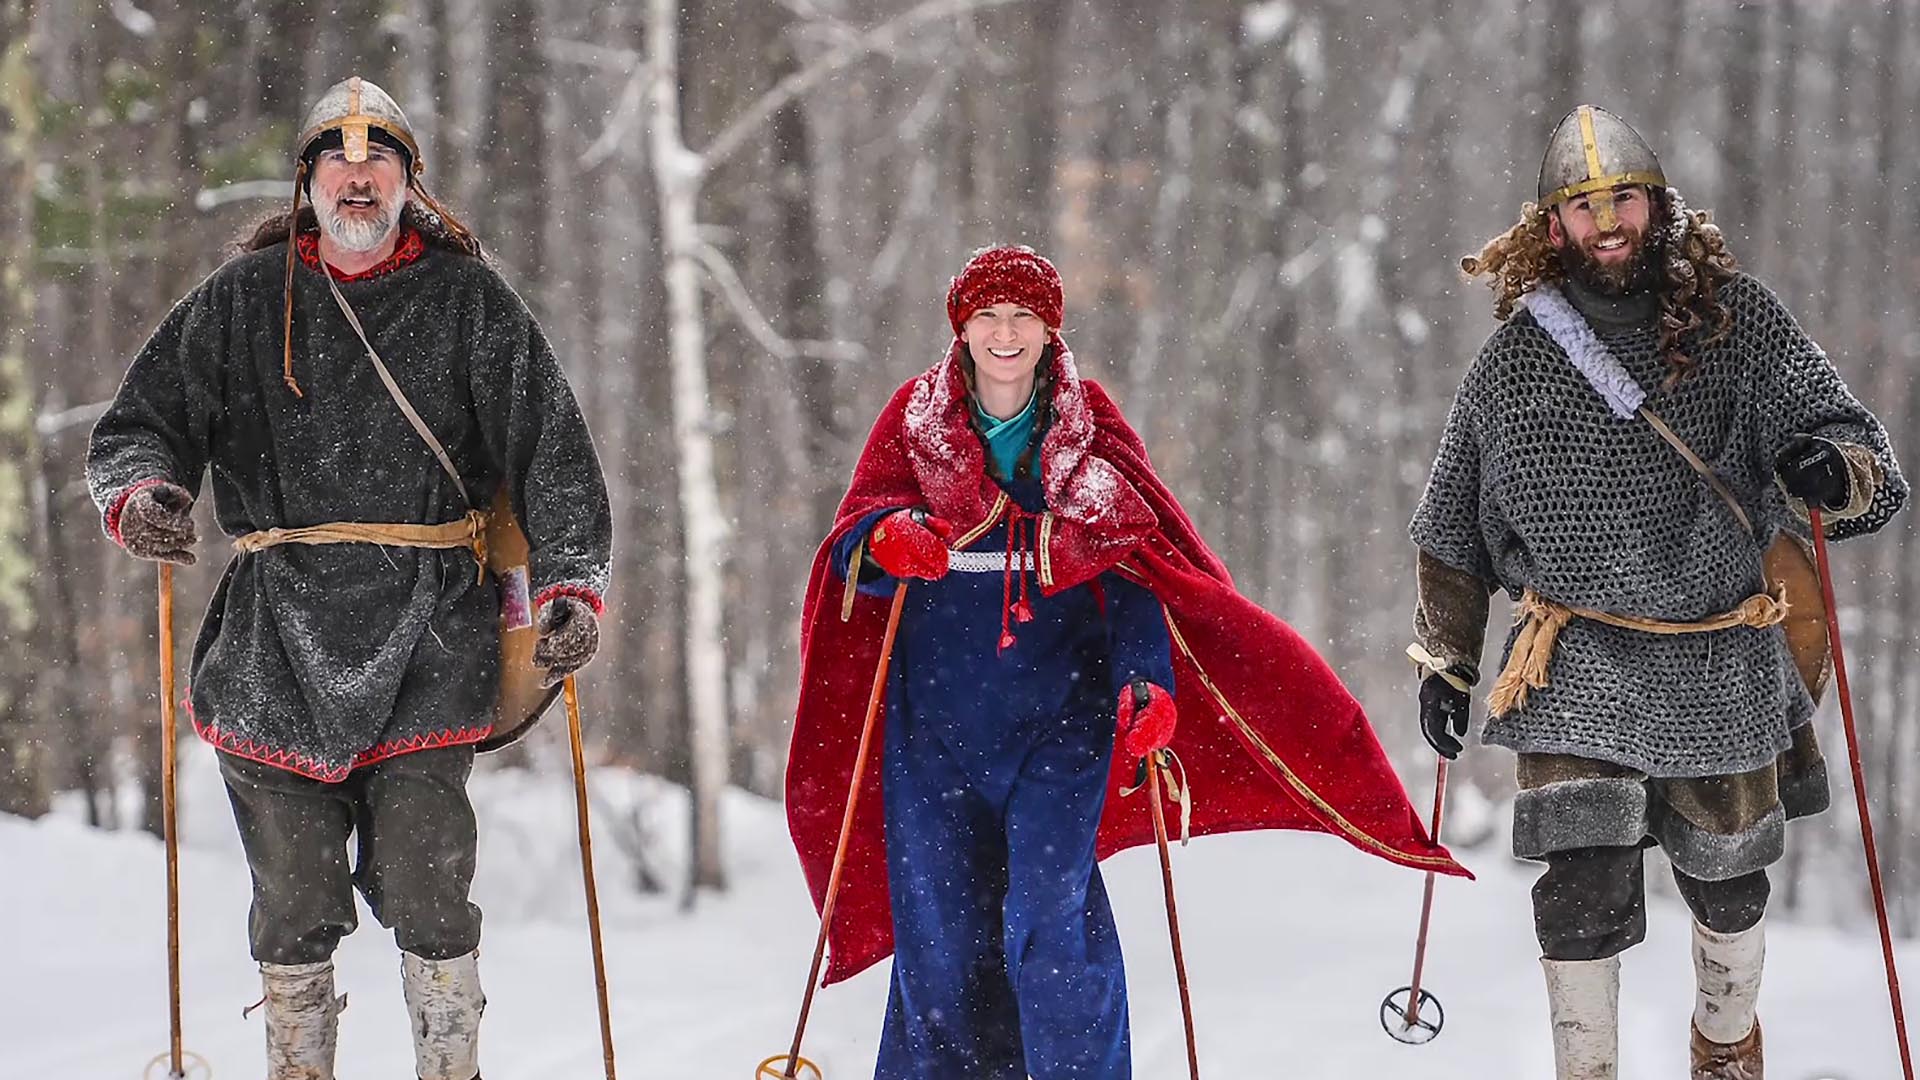 Three people in Nordic dress walk through a snowy forest.